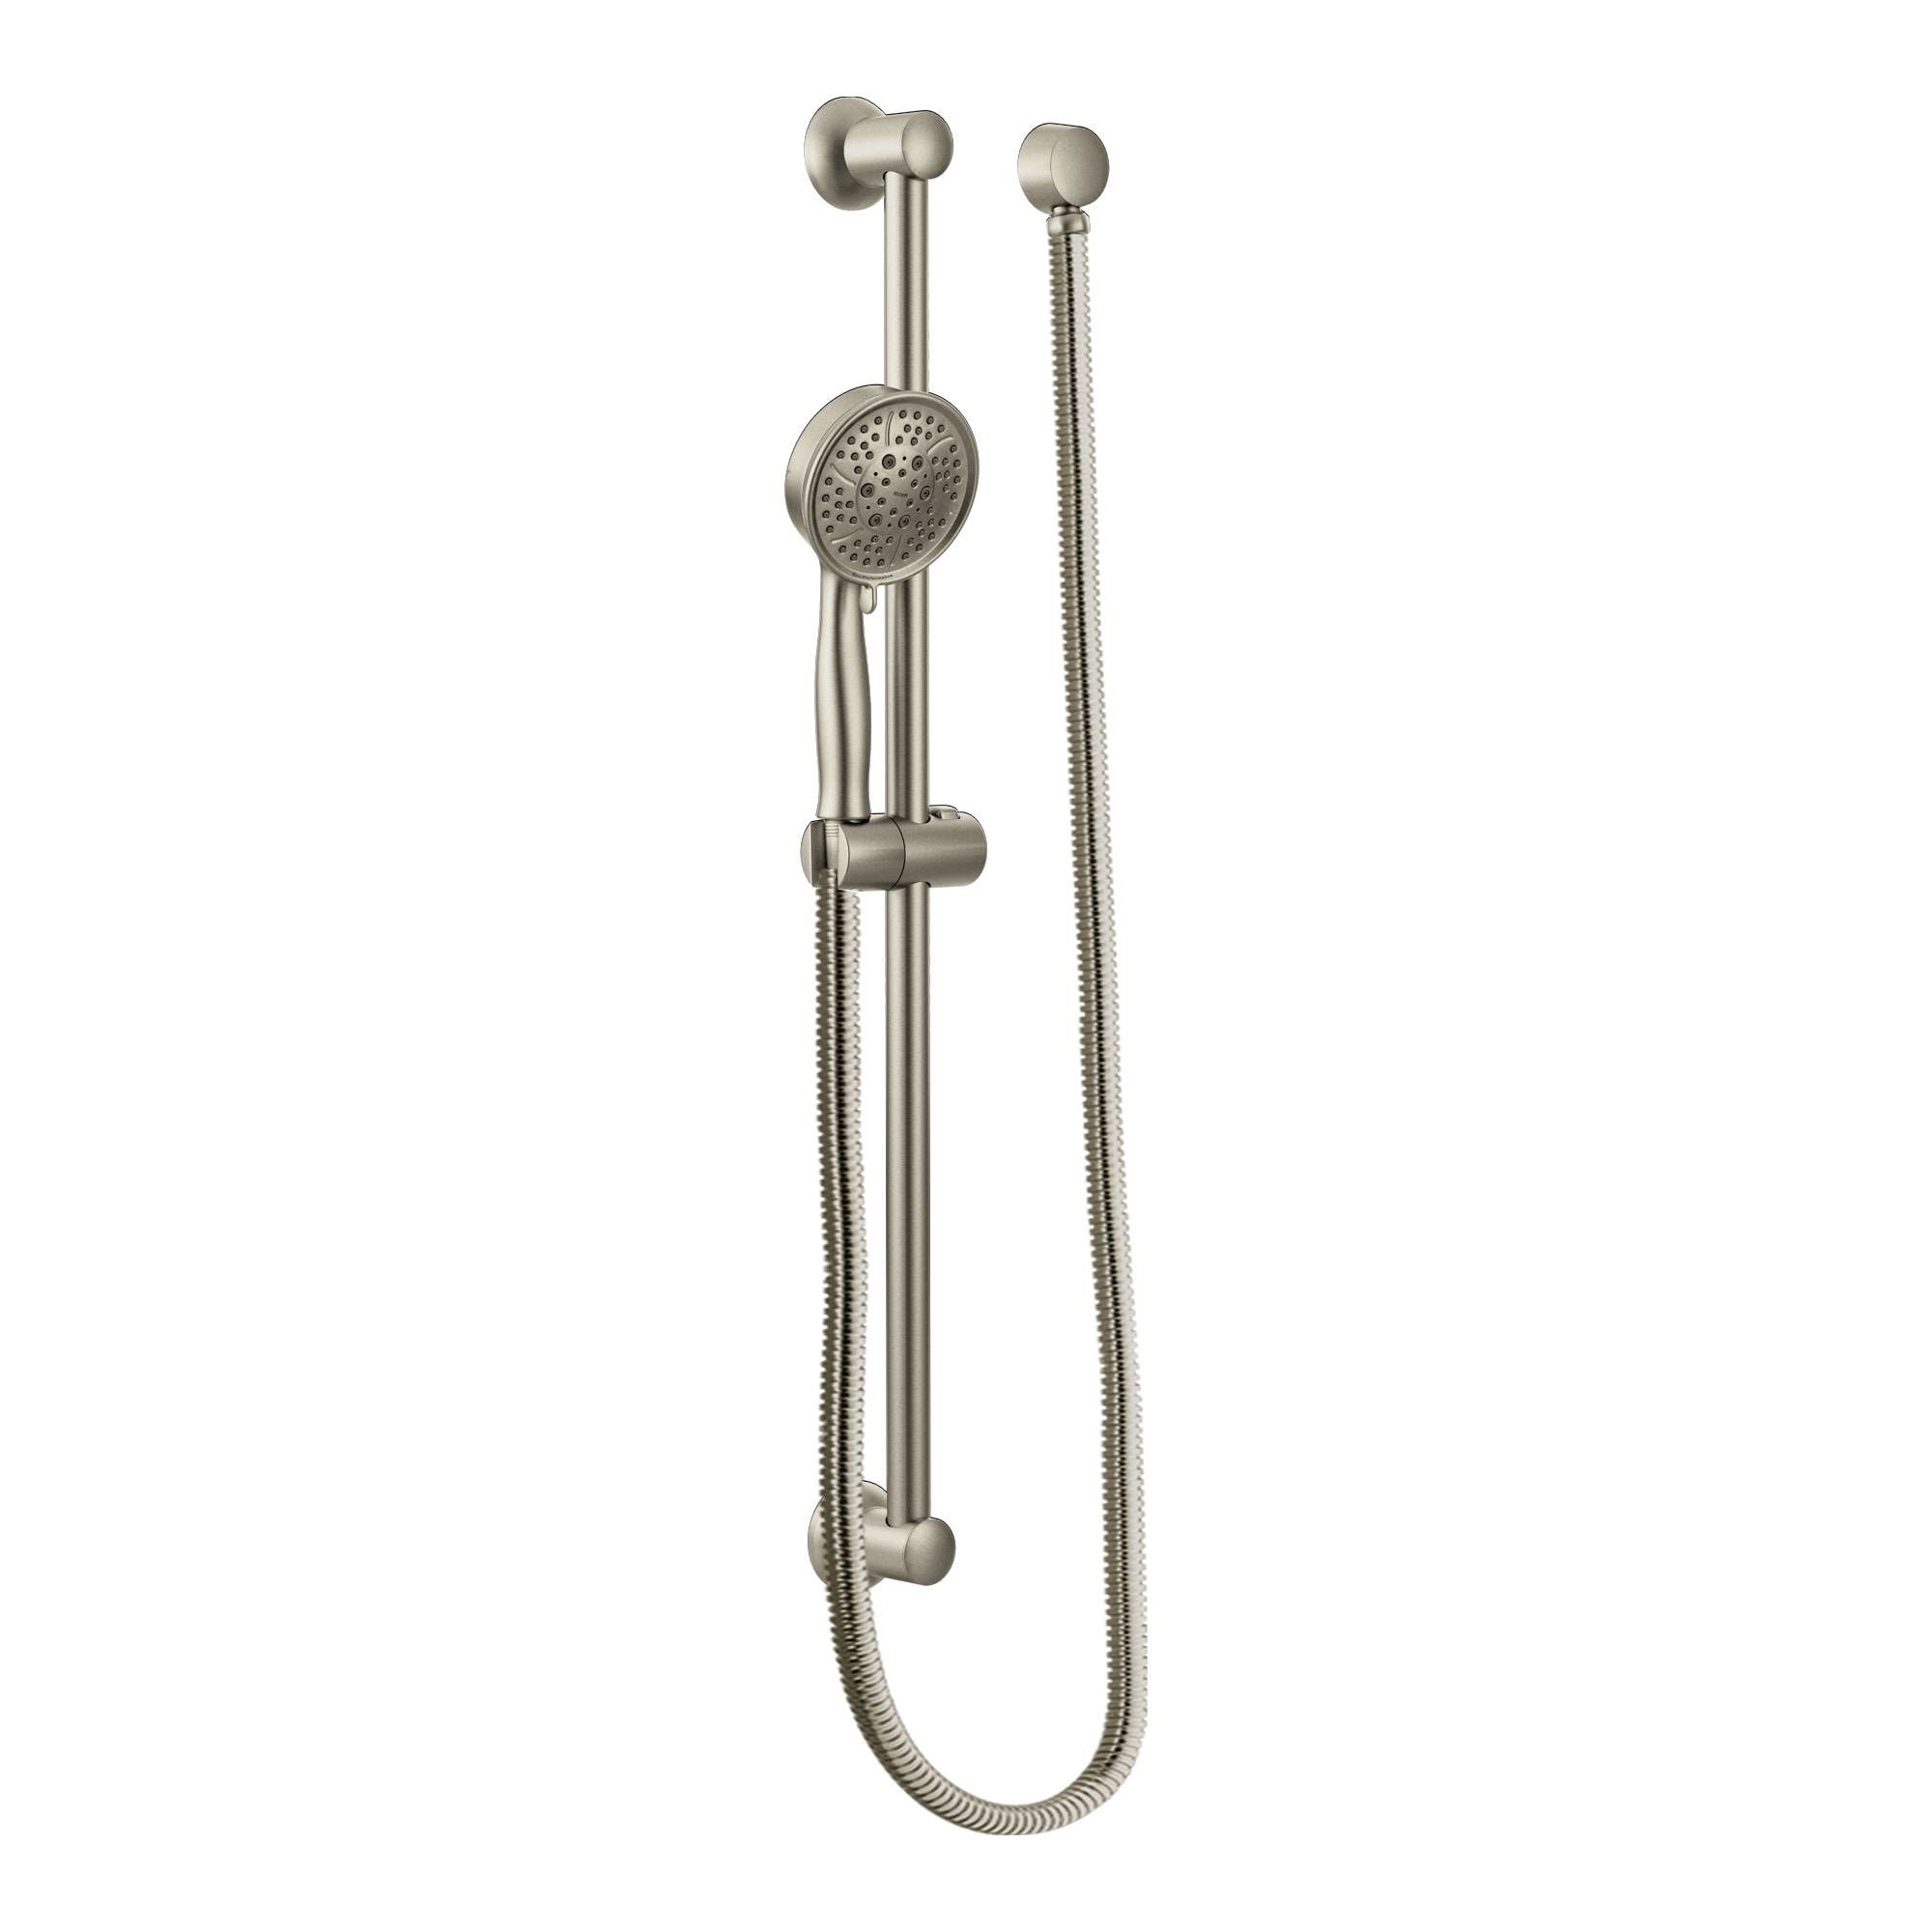 Brushed Nickel Moen 3667EPBN Handheld Showerhead with 69-Inch-Long Hose Featuring 30-Inch Slide Bar 